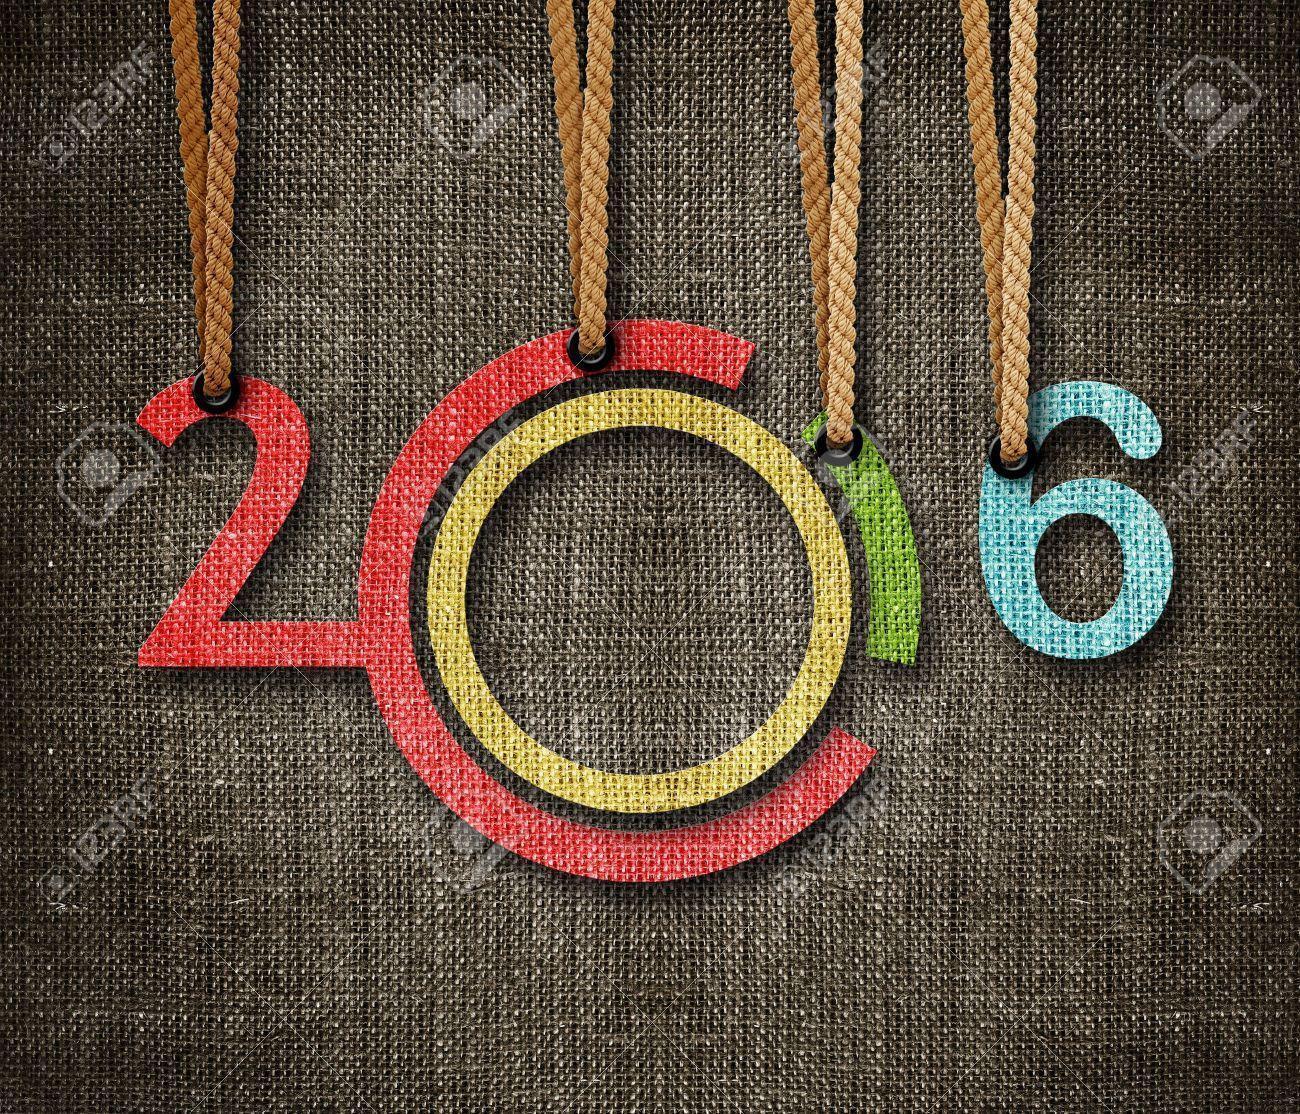 Happy New Year 2016 Image, Wallpaper and Profile picture